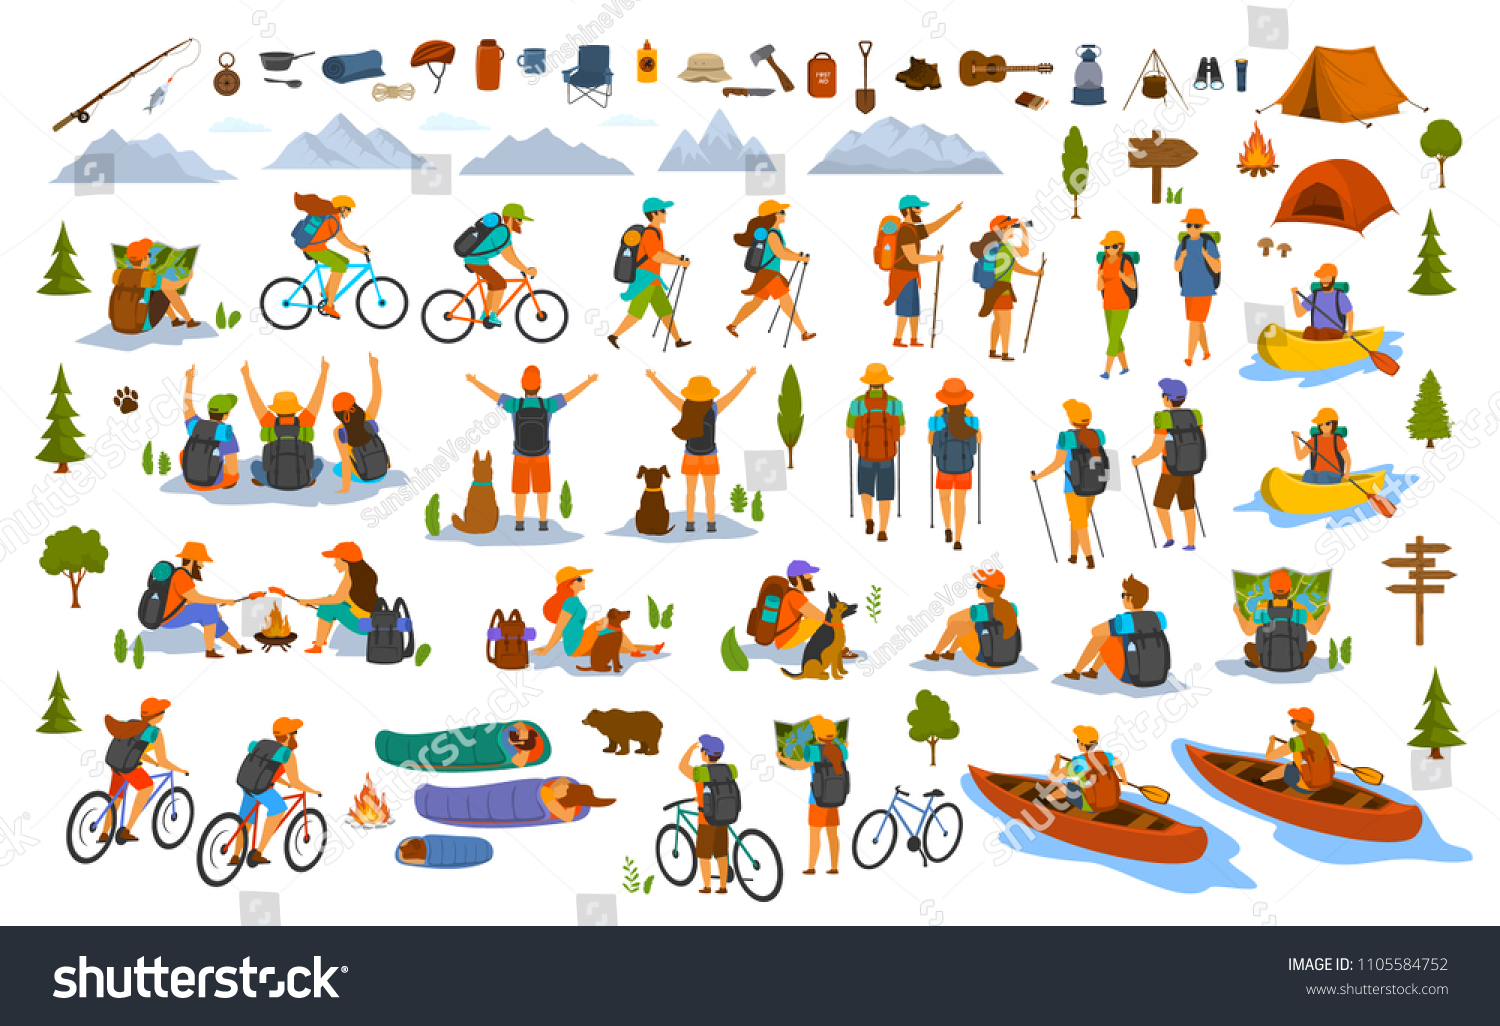 collection of hiking trekking people. young man woman couple hikers travel outdoors with mountain bikes kayaks camping, search location on map, sightseeing discover nature. isolated graphics set #1105584752